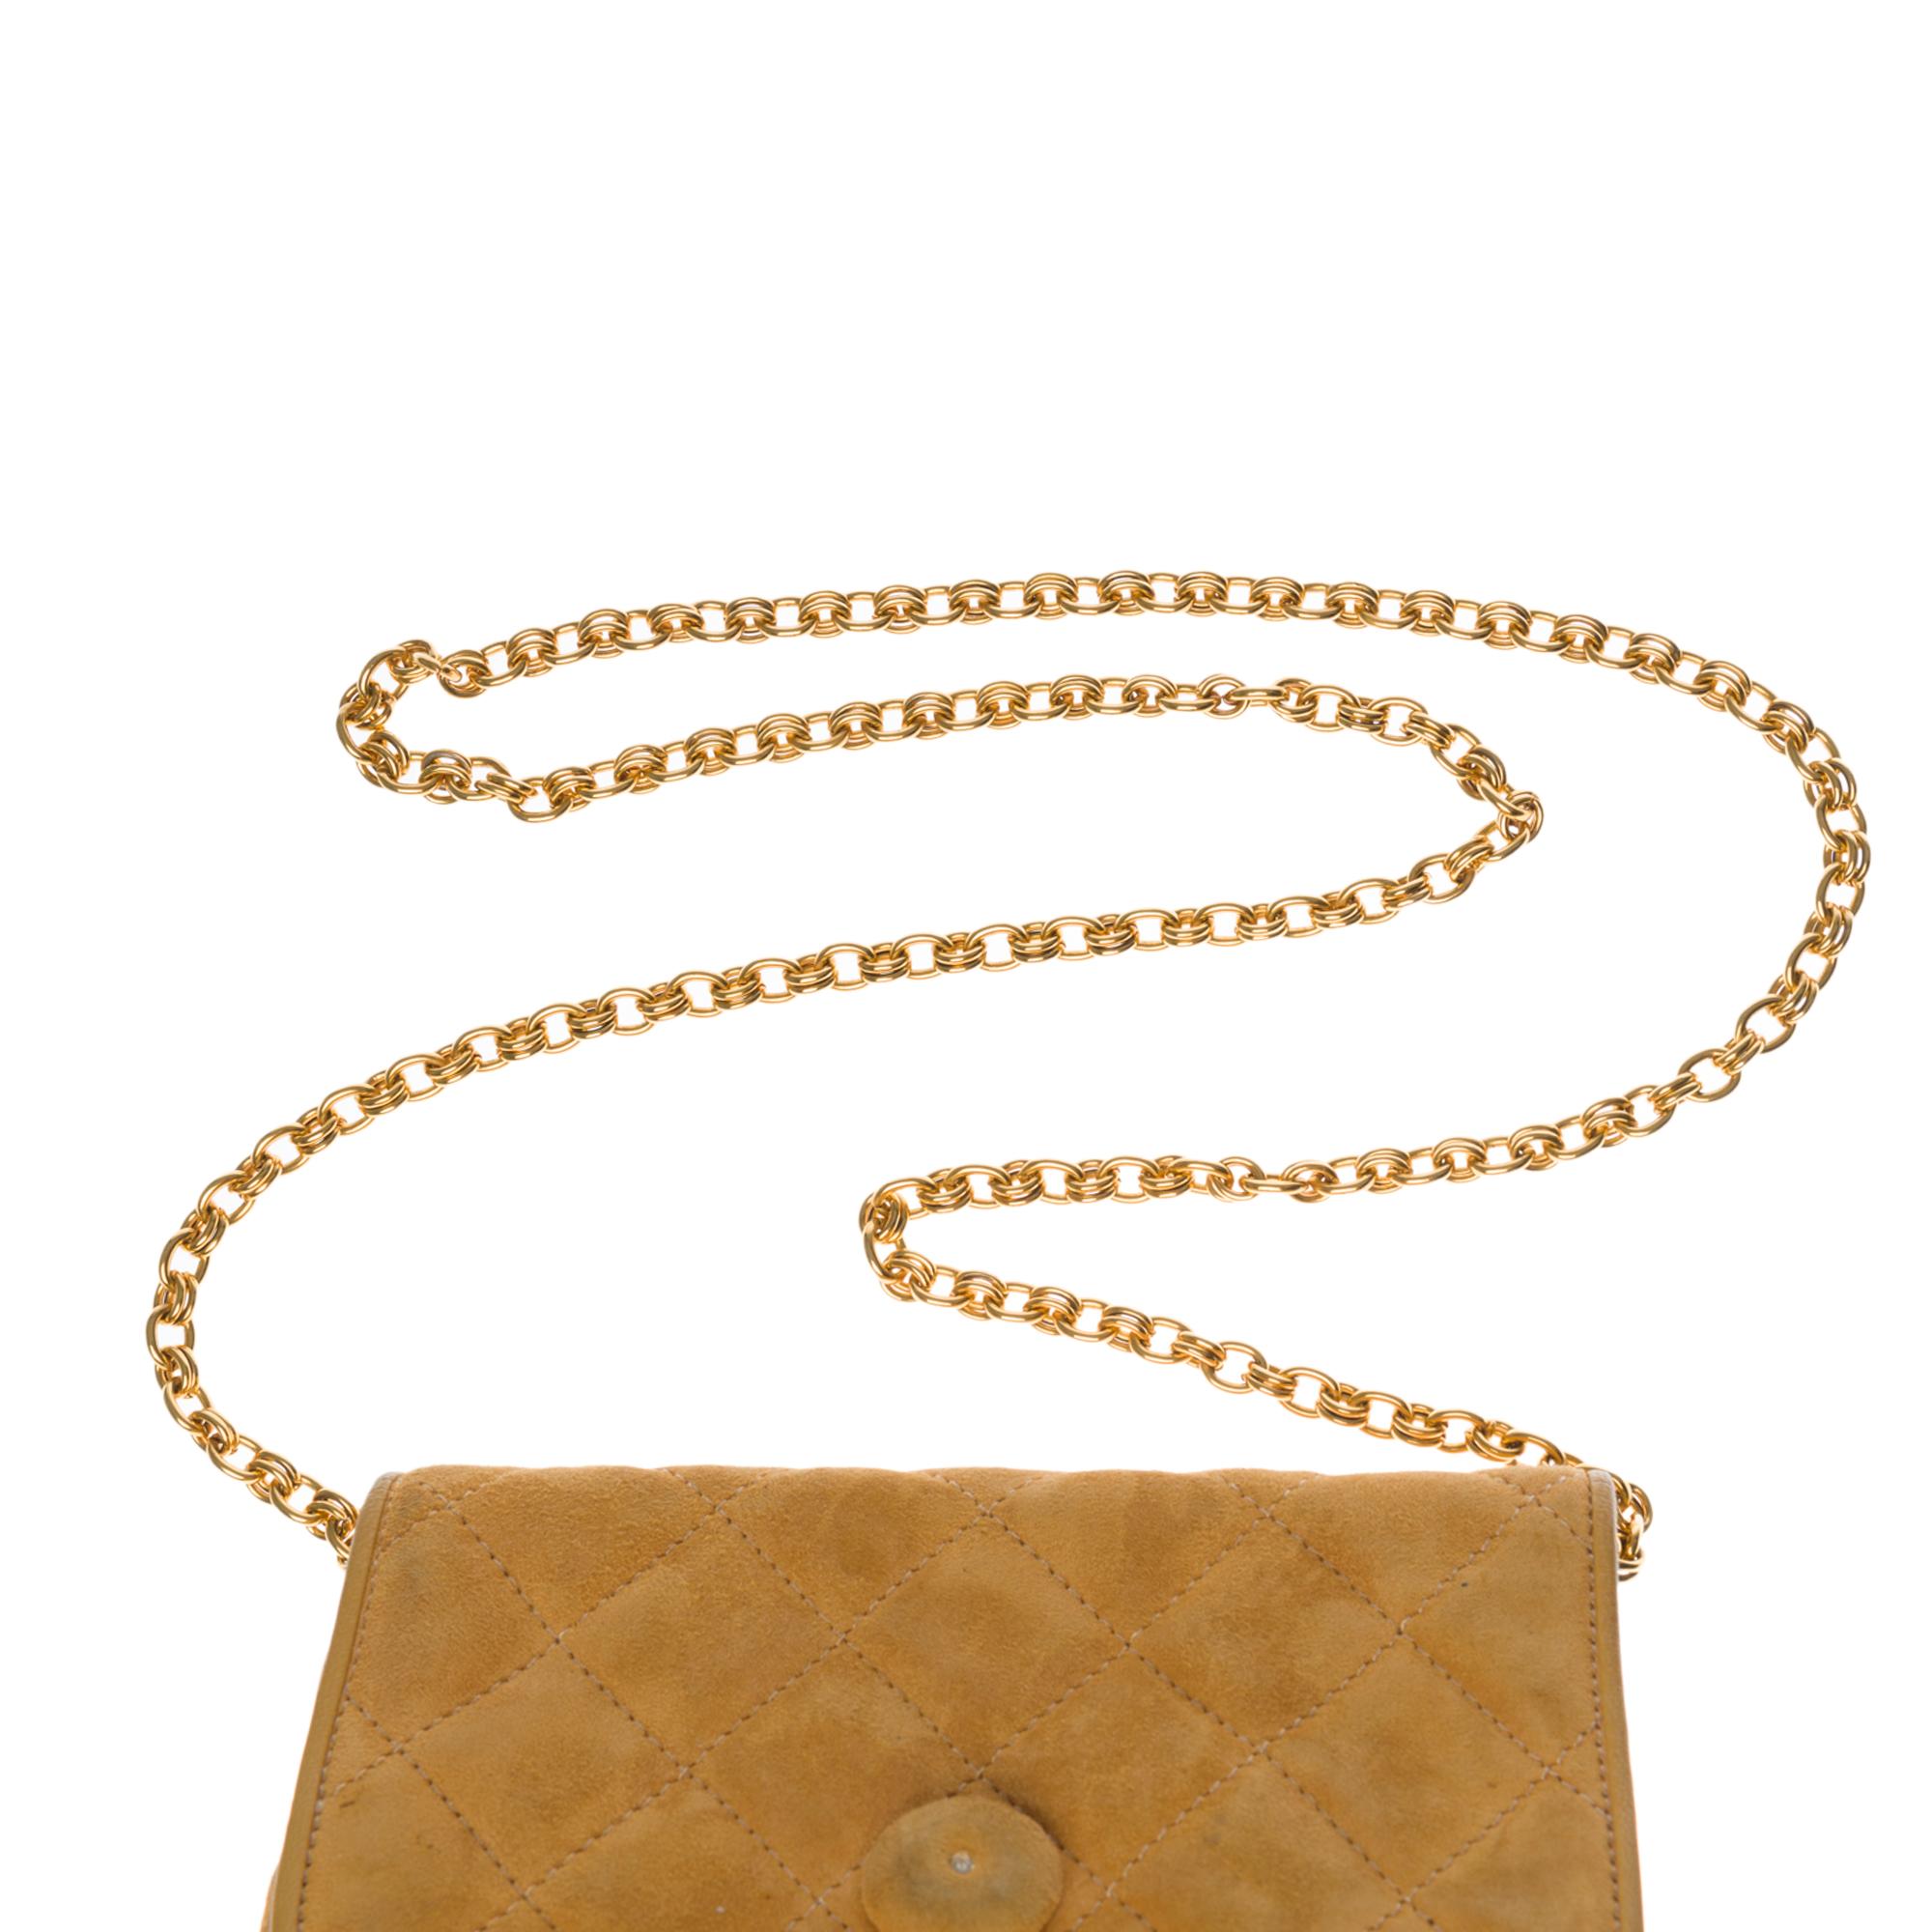 Chanel Classic Mini Shoulder Bag in beige quilted suede, GHW 1